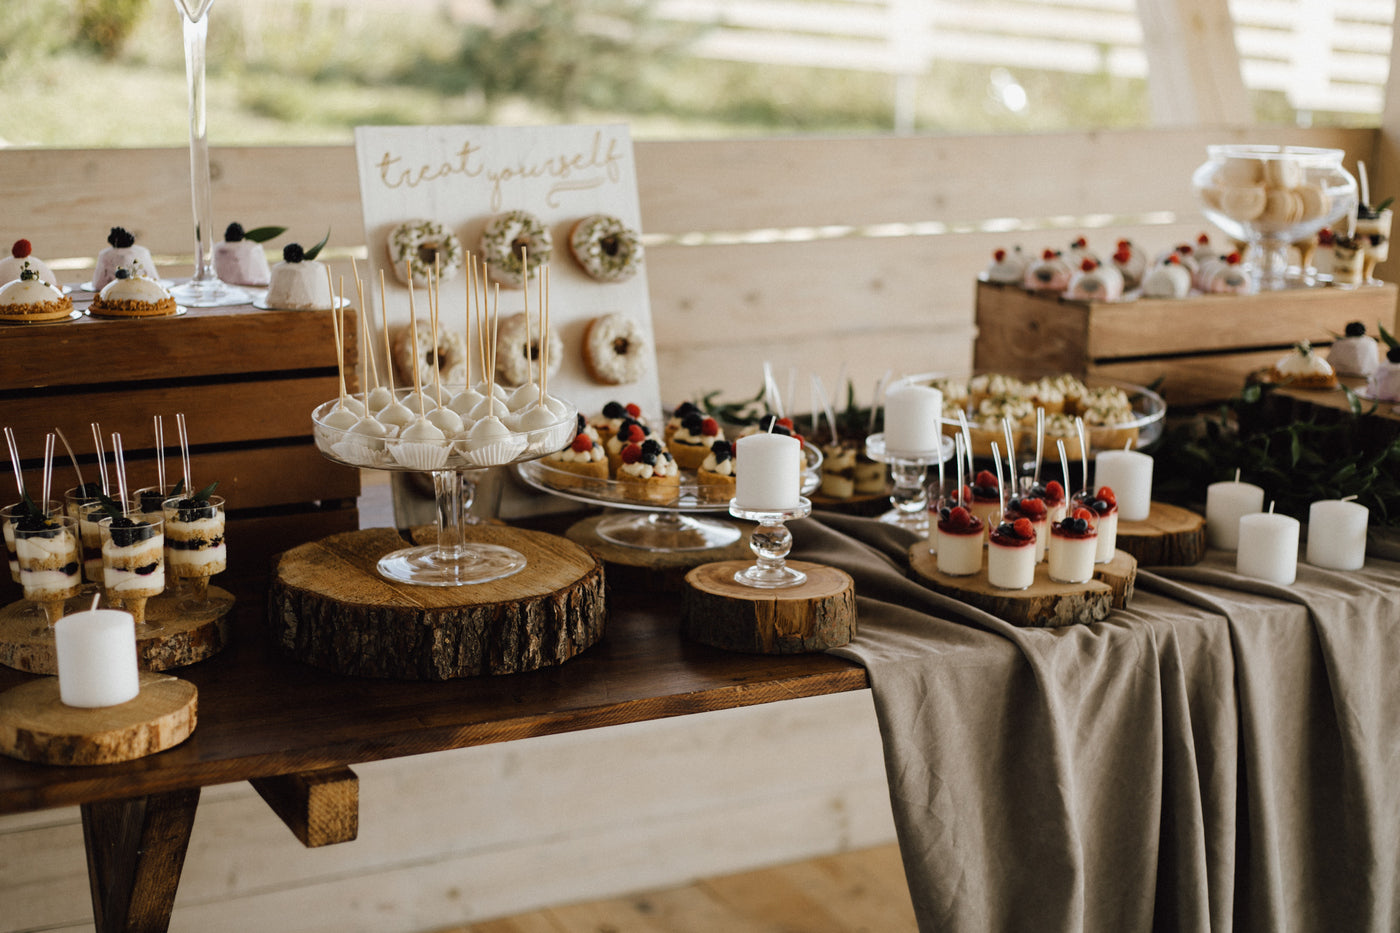 Creating a Rustic Autumn Dessert Table